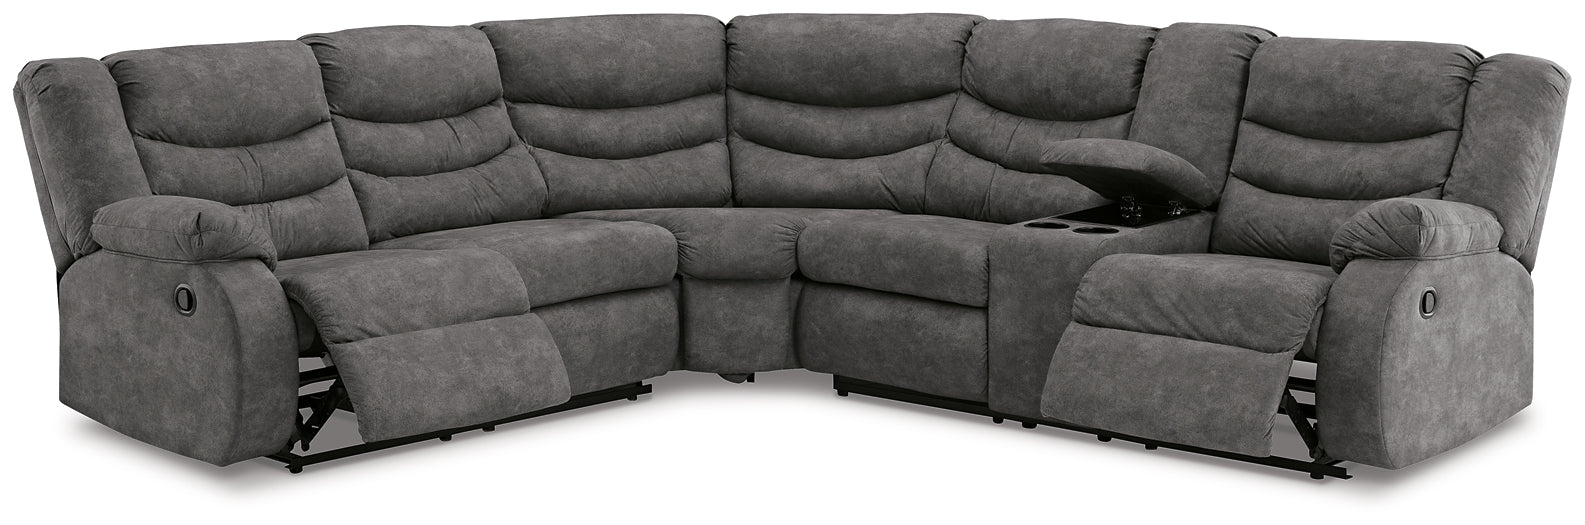 Partymate 2-Piece Reclining Sectional JB's Furniture  Home Furniture, Home Decor, Furniture Store